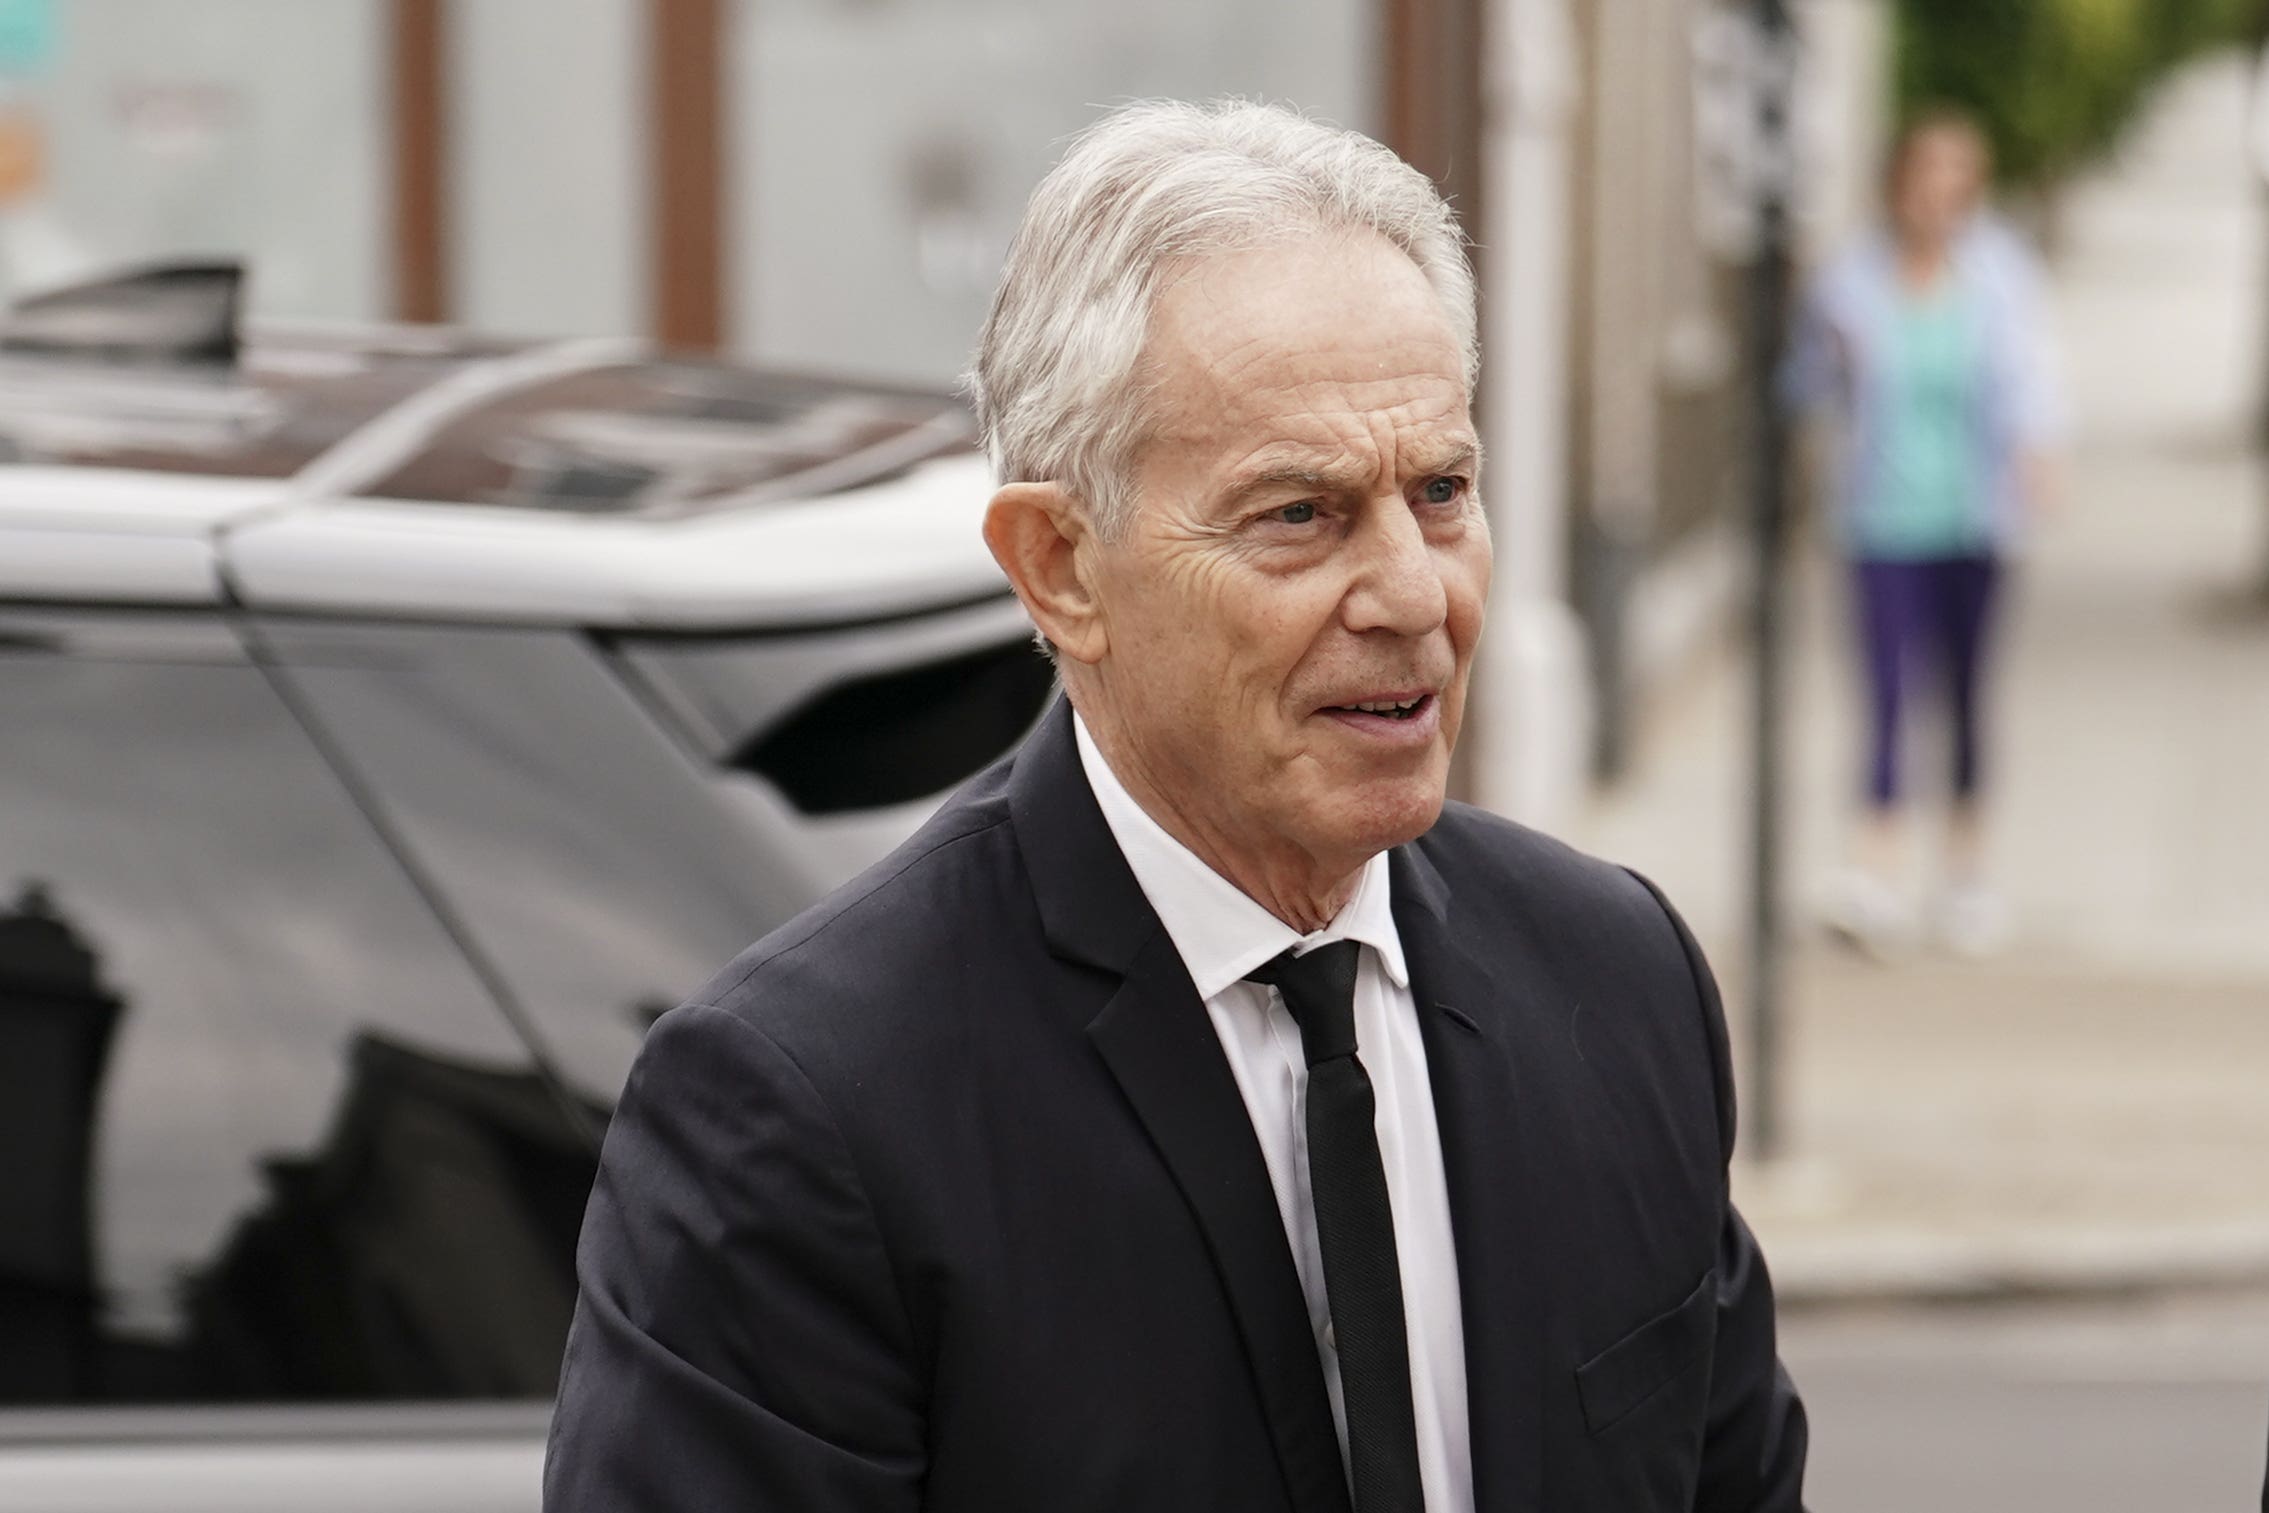 Sir Tony was of the view that continued engagement was ‘justified’ despite the ‘terrible crime’, according to the former prime minister’s spokesperson